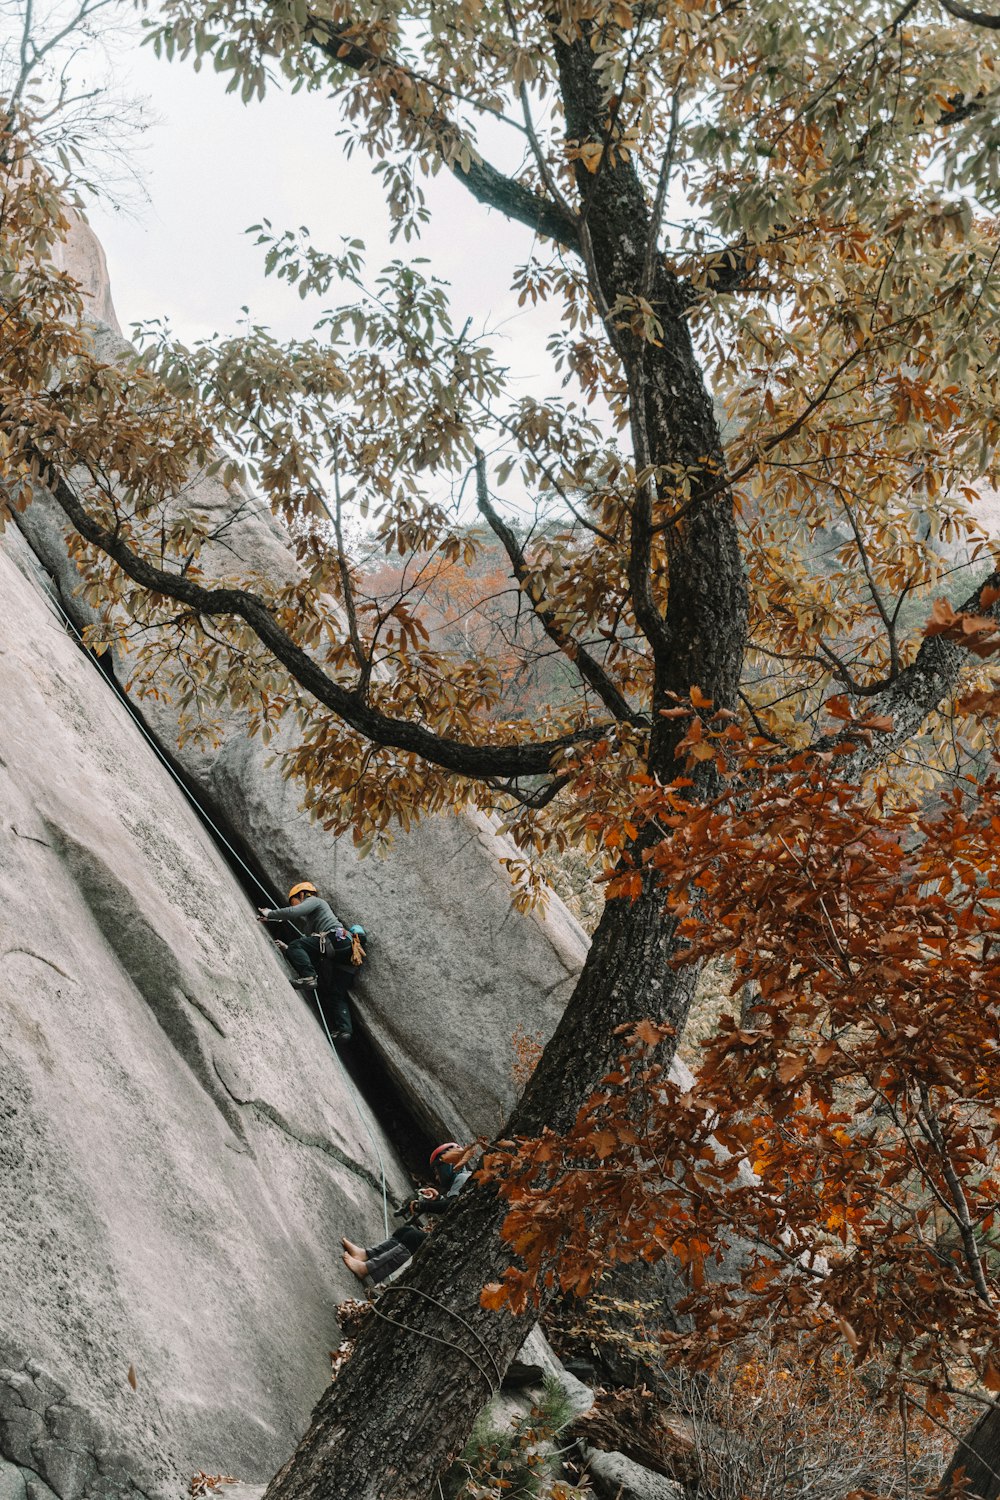 a man climbing up the side of a large rock